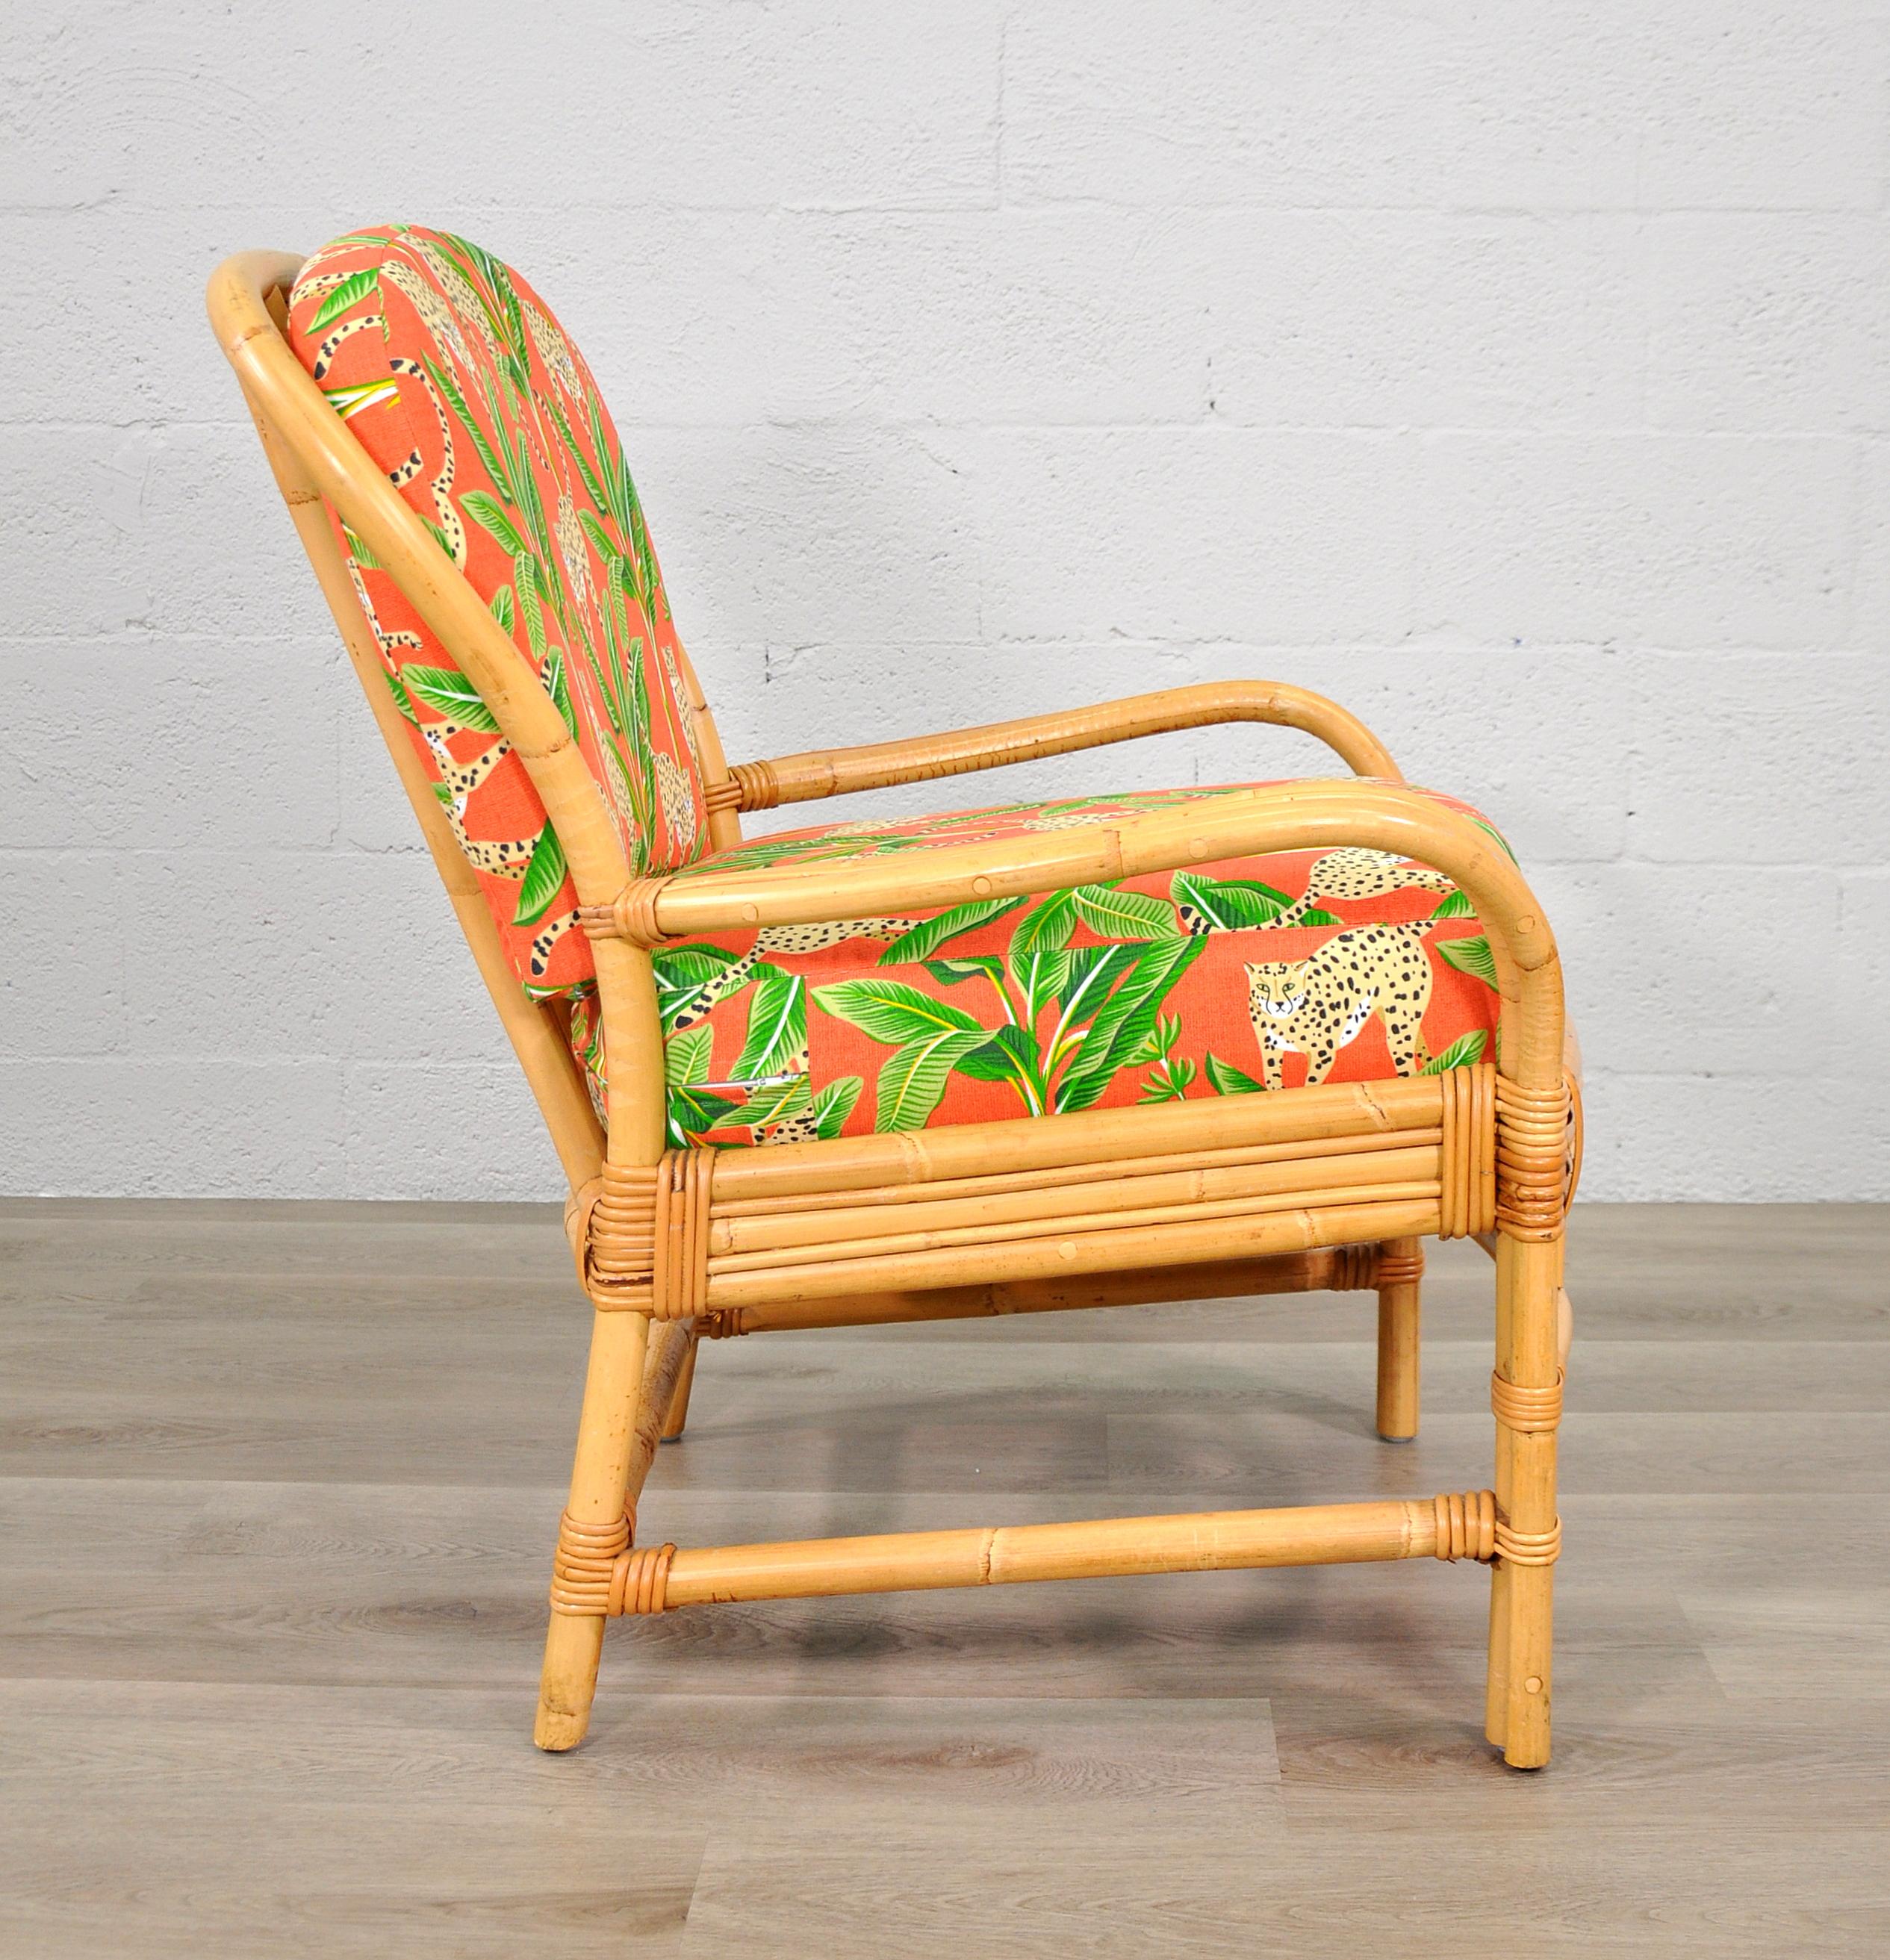 Rattan Chair with Tropical Cheetah and Palm Fabric For Sale 1